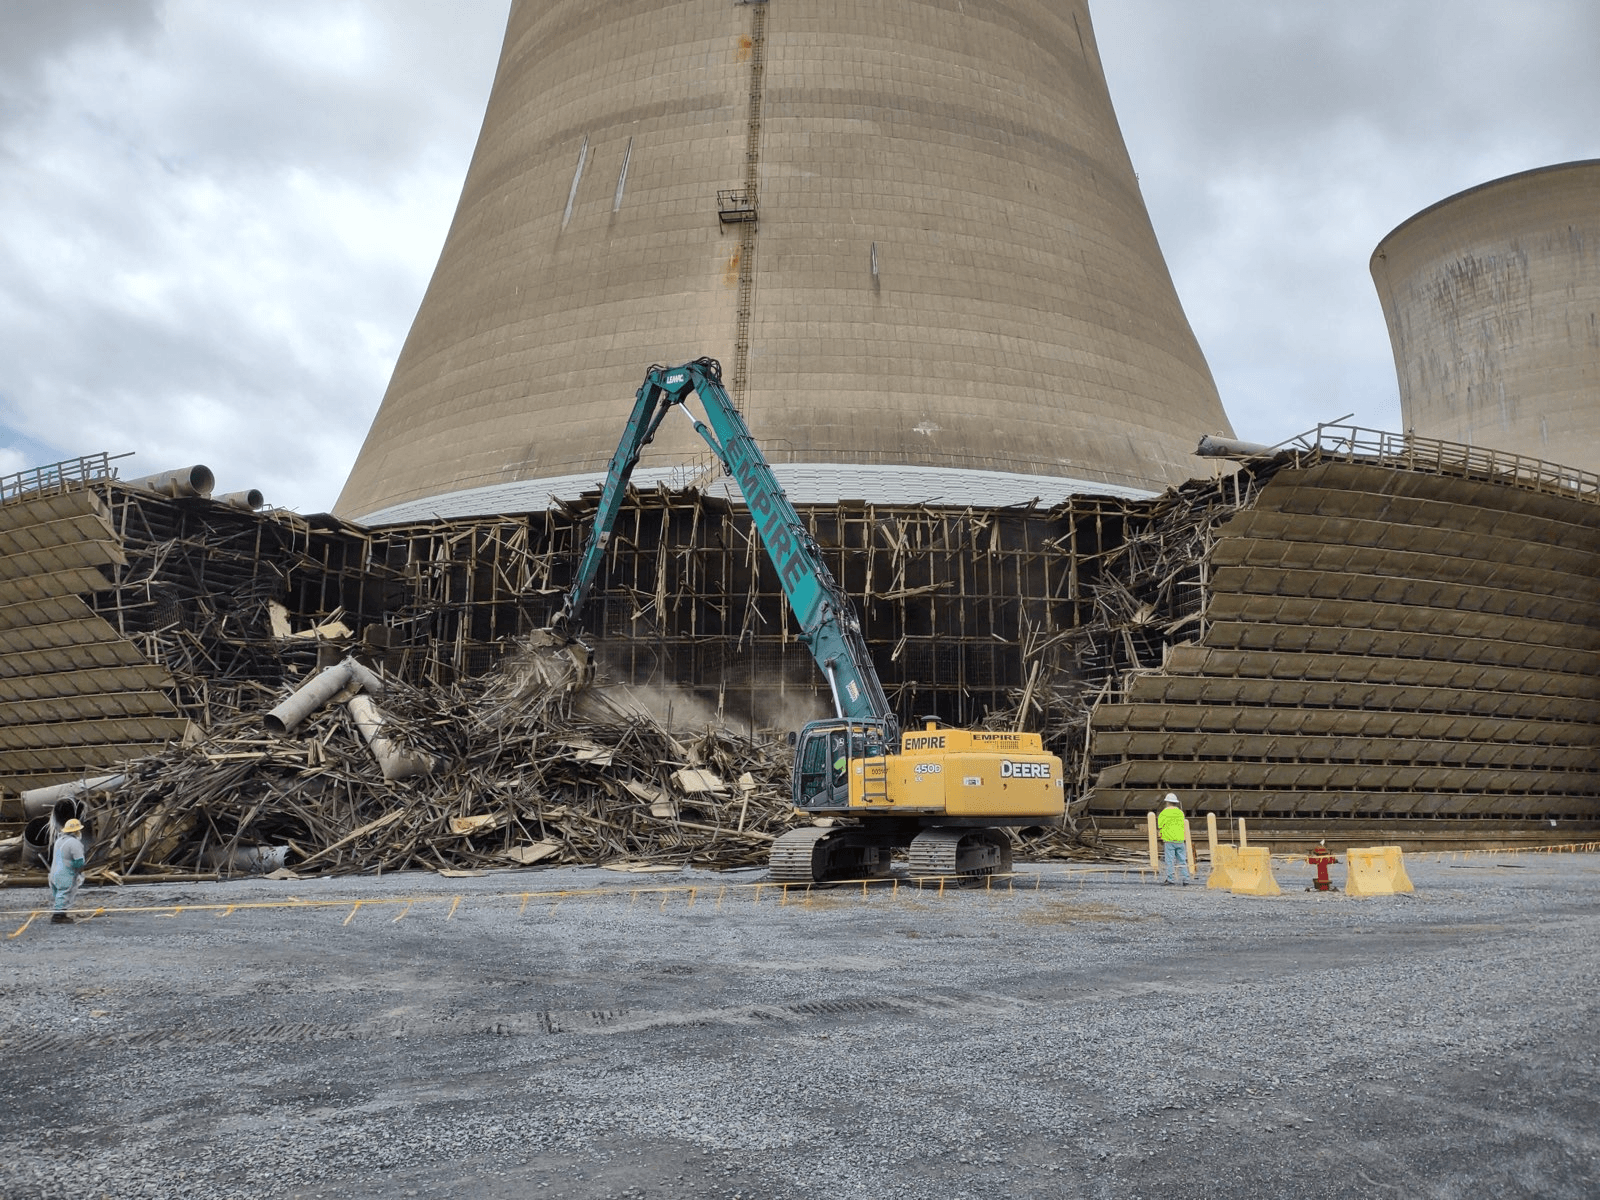 A large cooling tower is being demolished by a crane.